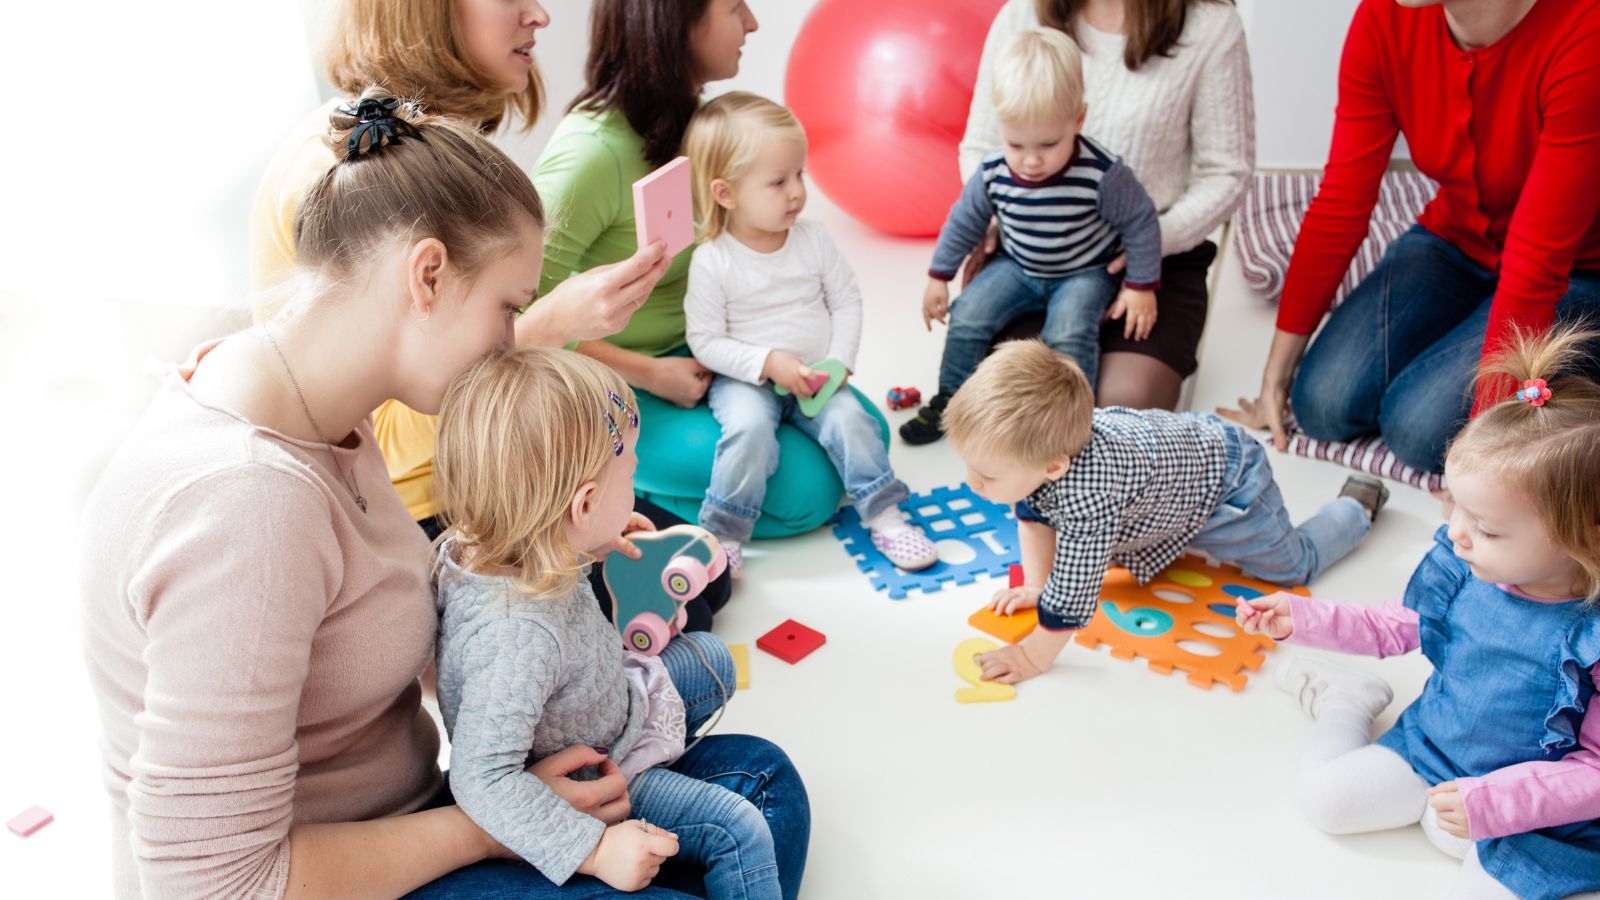 Parent and child playgroup interact in a circle on the floor.